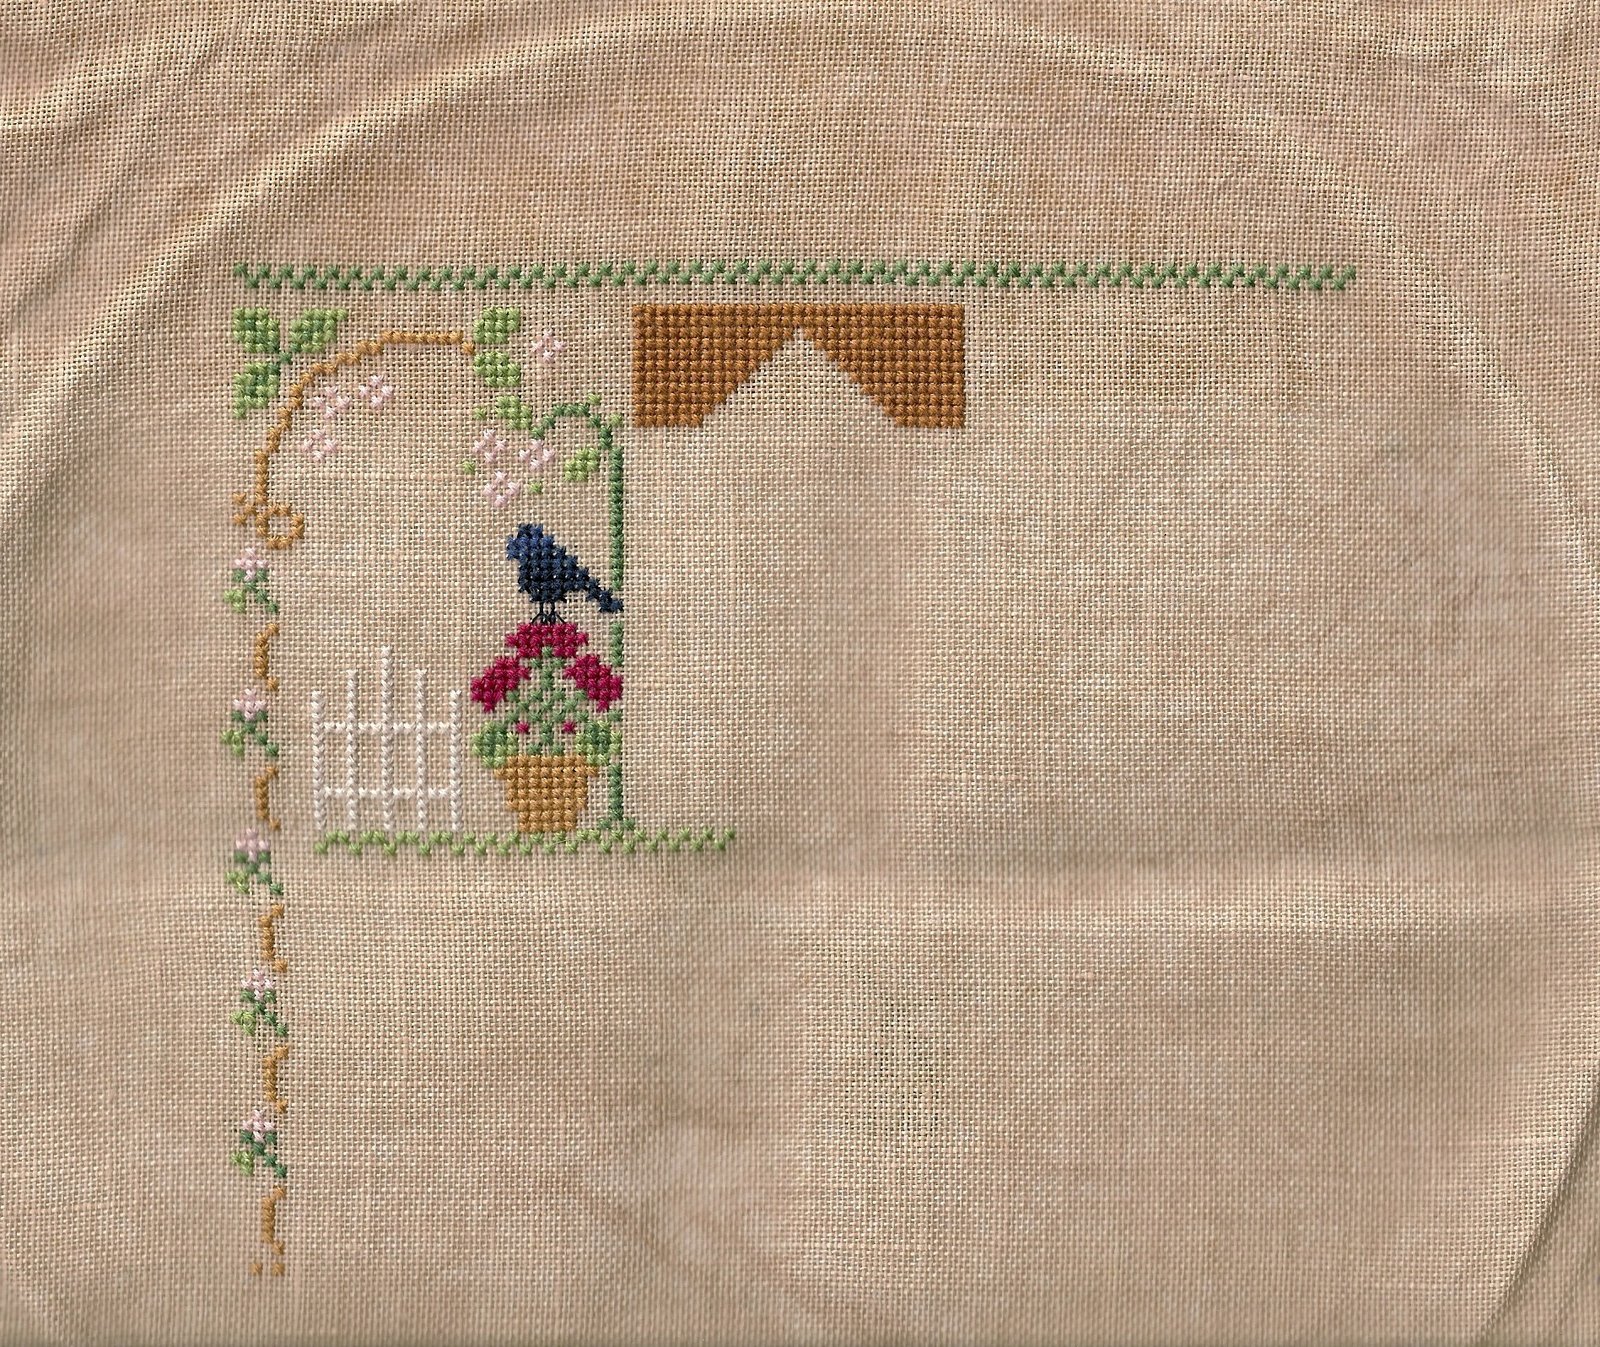 [Country+Cottage+Needleworks_Geranium+House+WIP_15+April+2007_A.jpg]